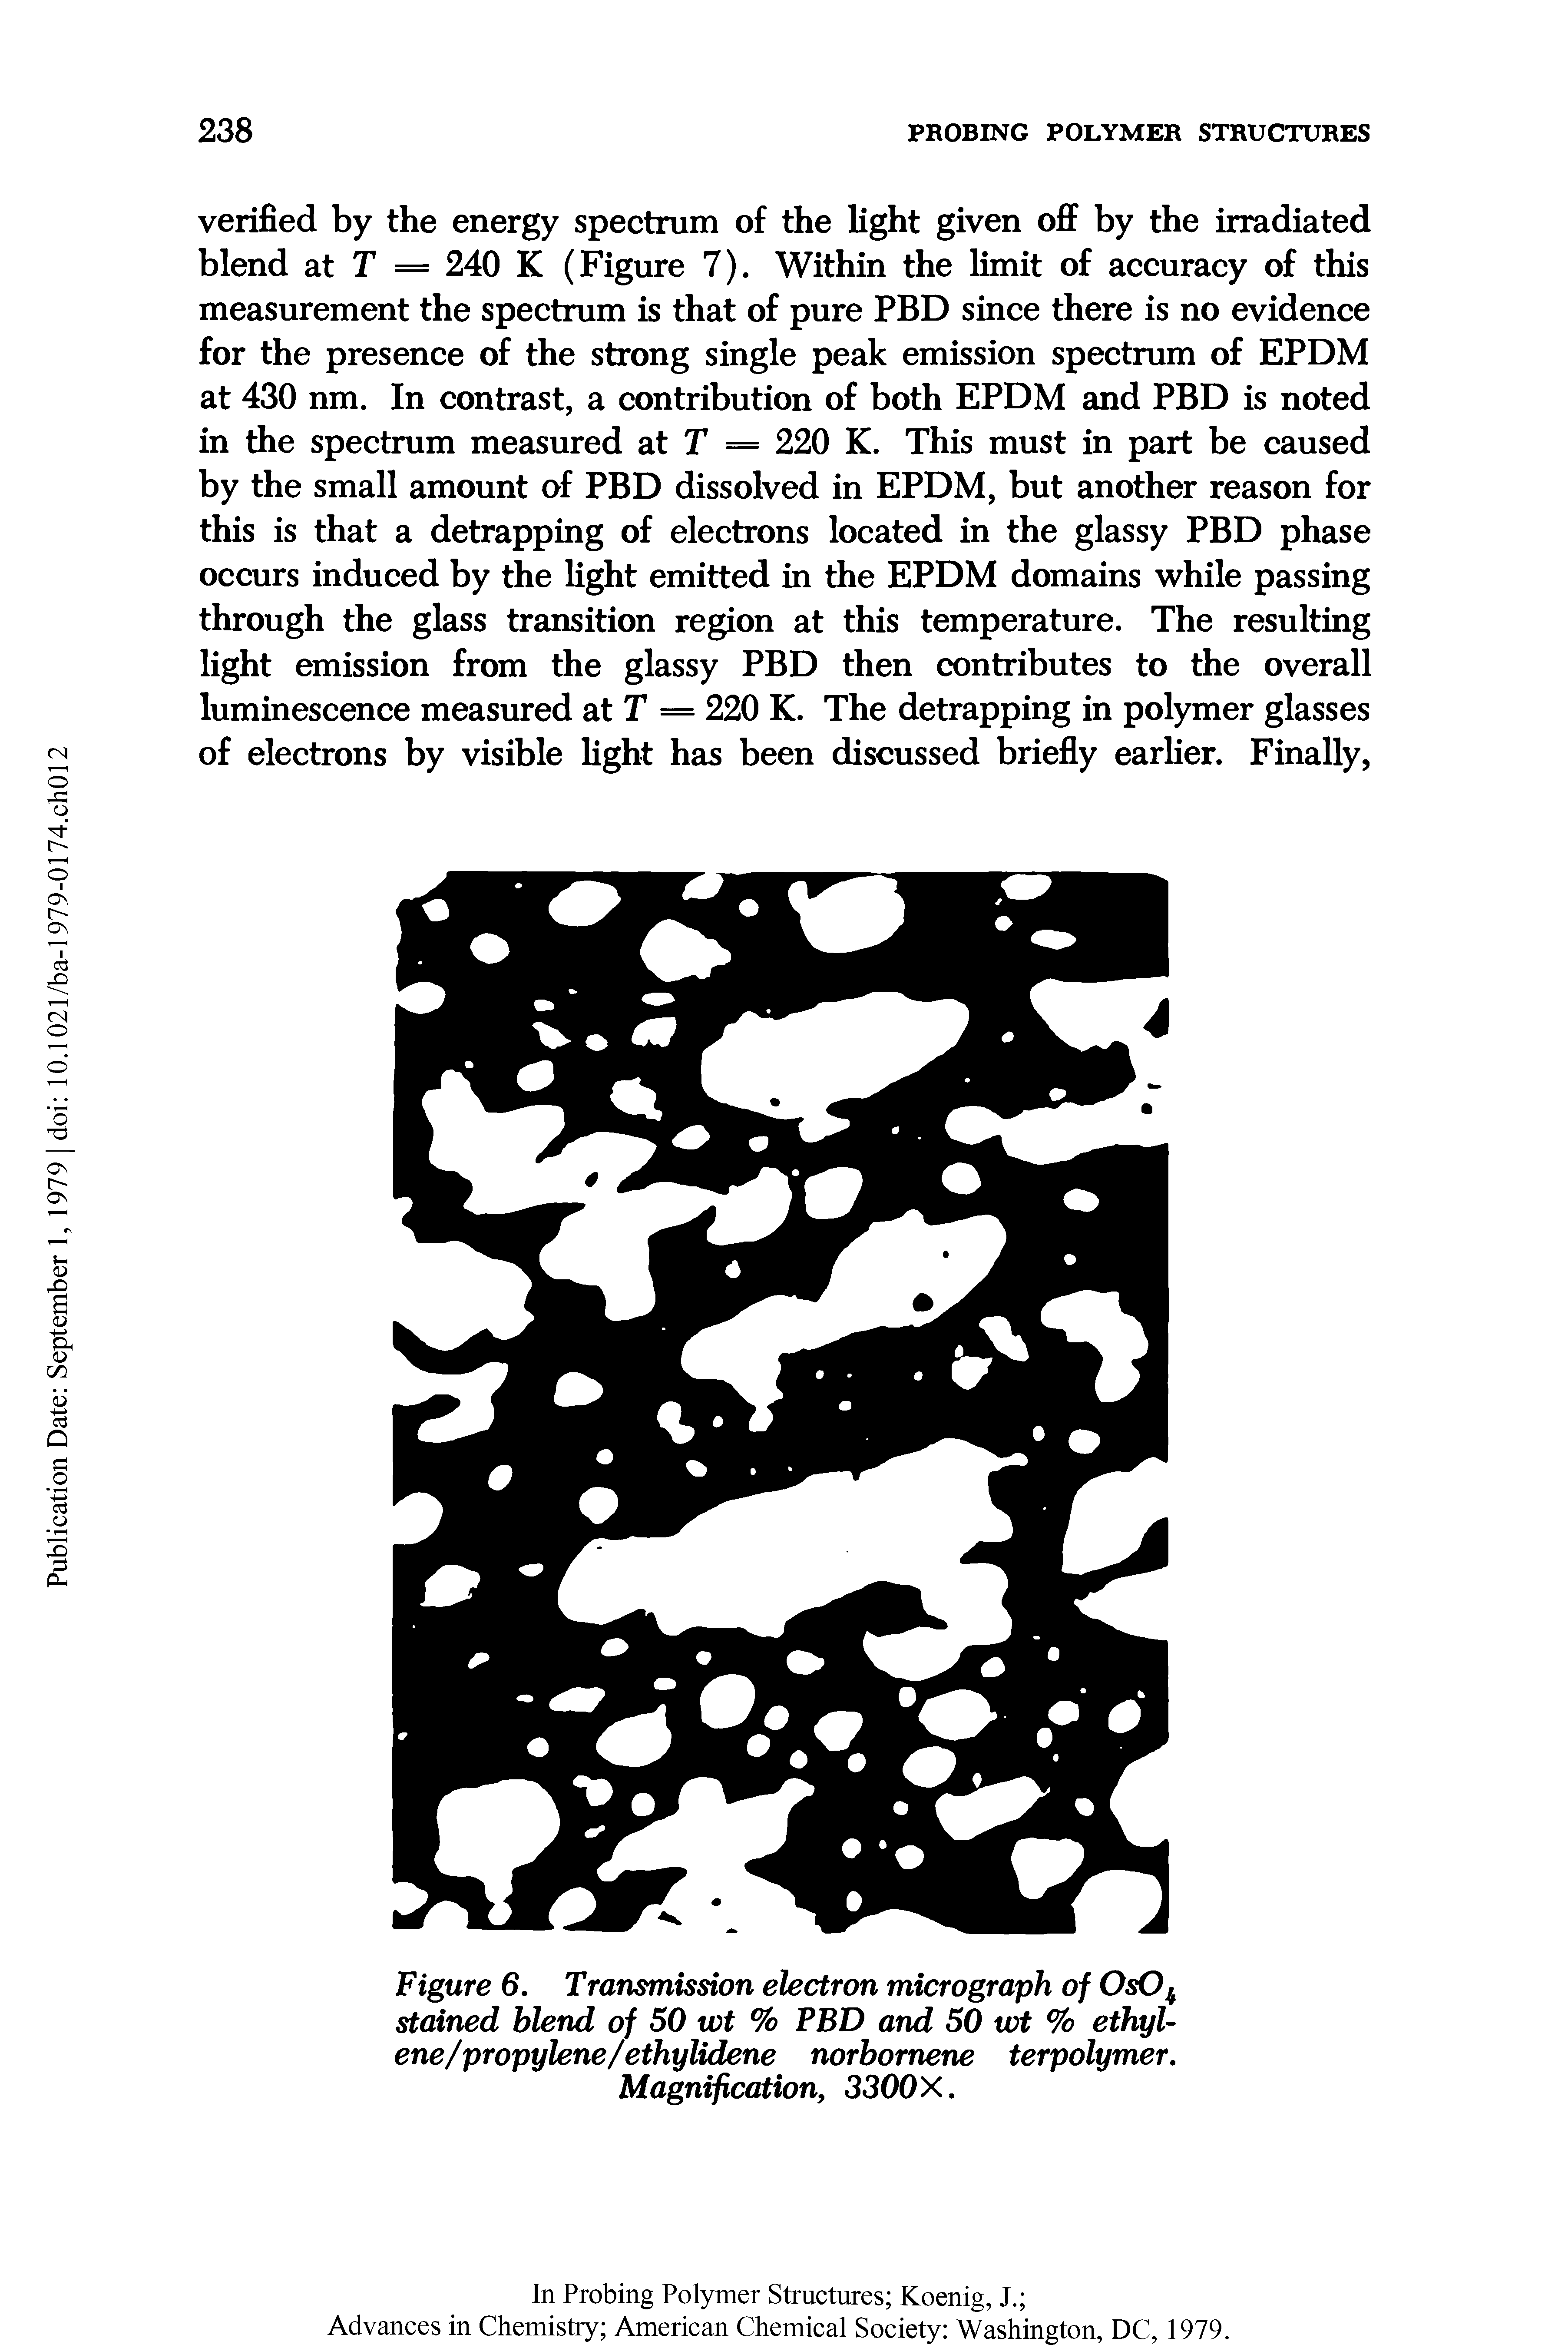 Figure 6, Transmission electron micrograph of OsO stained blend of 50 wt % PBD and 50 wt % ethylene/propylene/ethylidene norbornene terpolymer. Magnification, 3300X,...